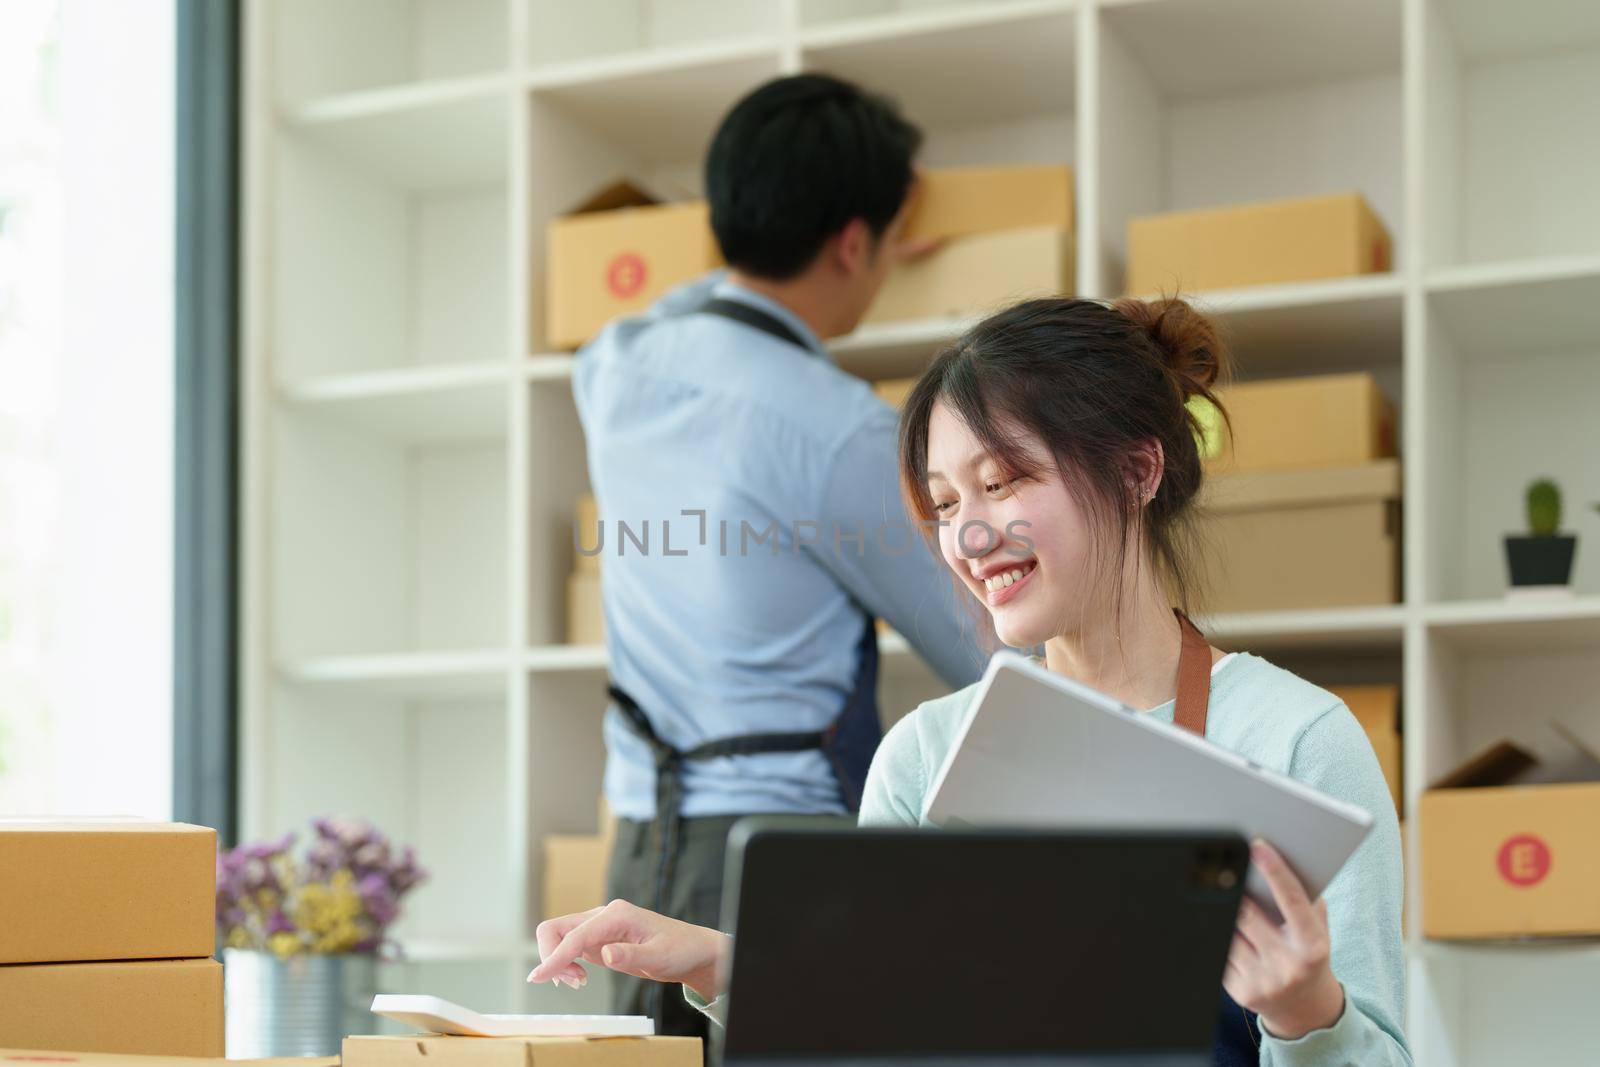 Portrait of a small start-up and SME owner, an Asian male and female entrepreneur checking orders and packing for customers, self-employed, freelance, online selling by Manastrong